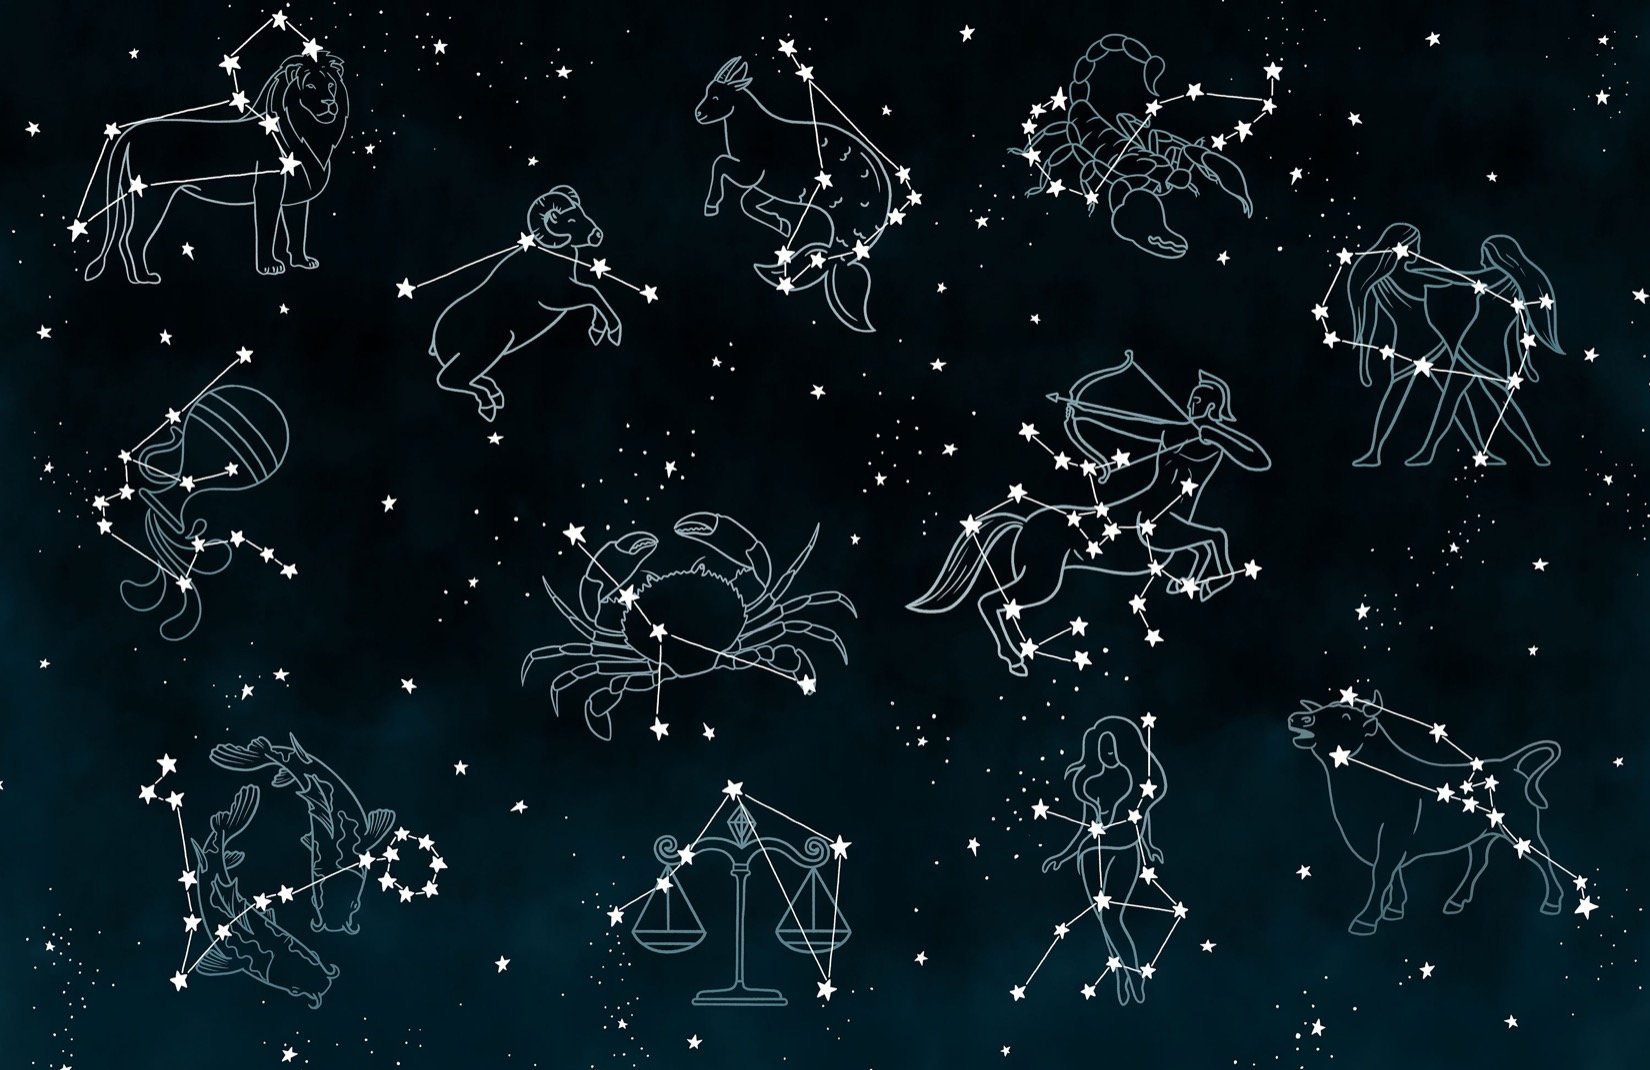 Horoscope & Zodiac Sign Constellation Wallpapers Mural.